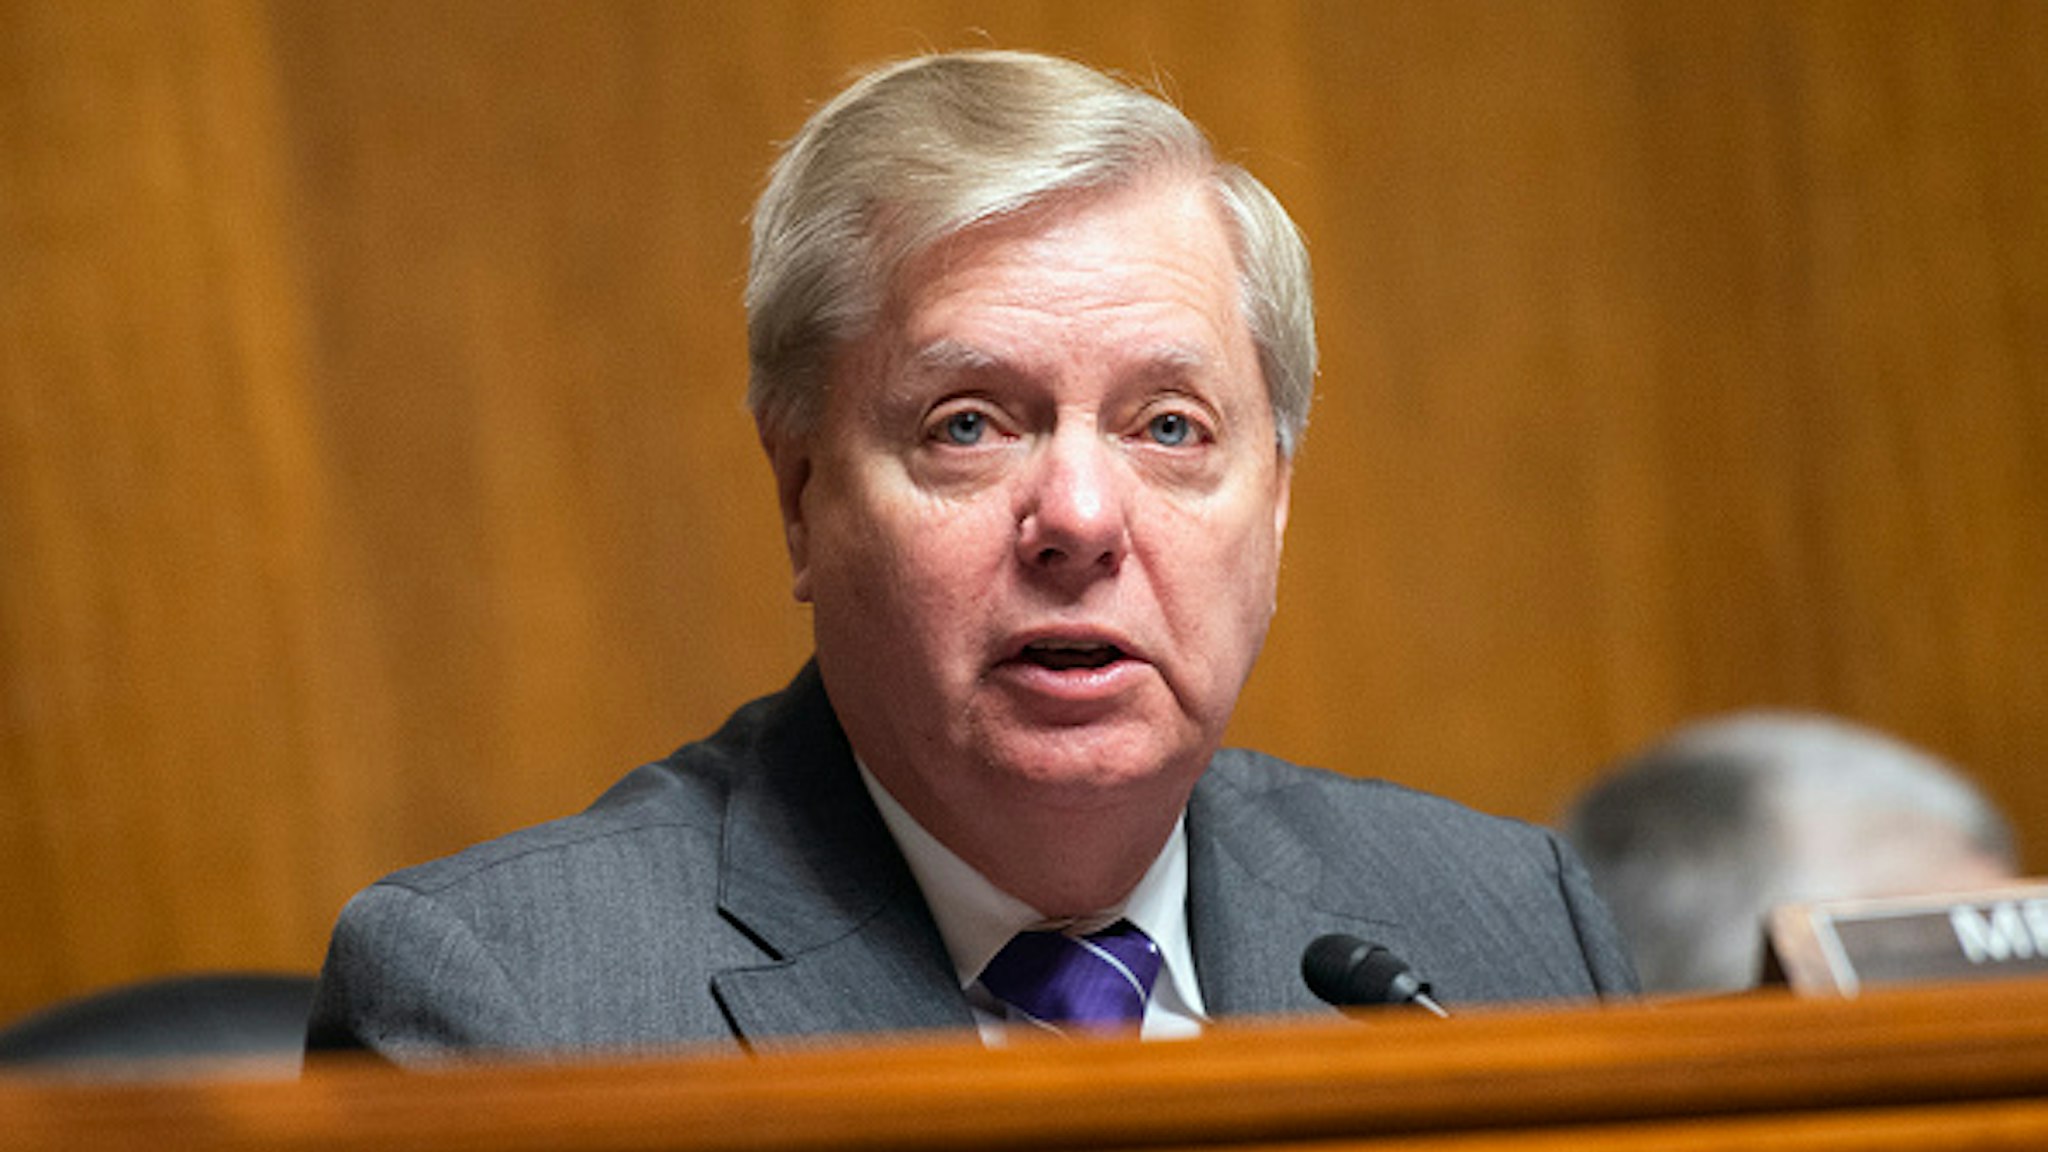 UNITED STATES - FEBRUARY 25: Sen. Lindsey Graham, R-S.C., speaks during a Senate Judiciary Committee hearing on Universal Injunction Challenges in Washington on Tuesday, Feb. 25, 2020.